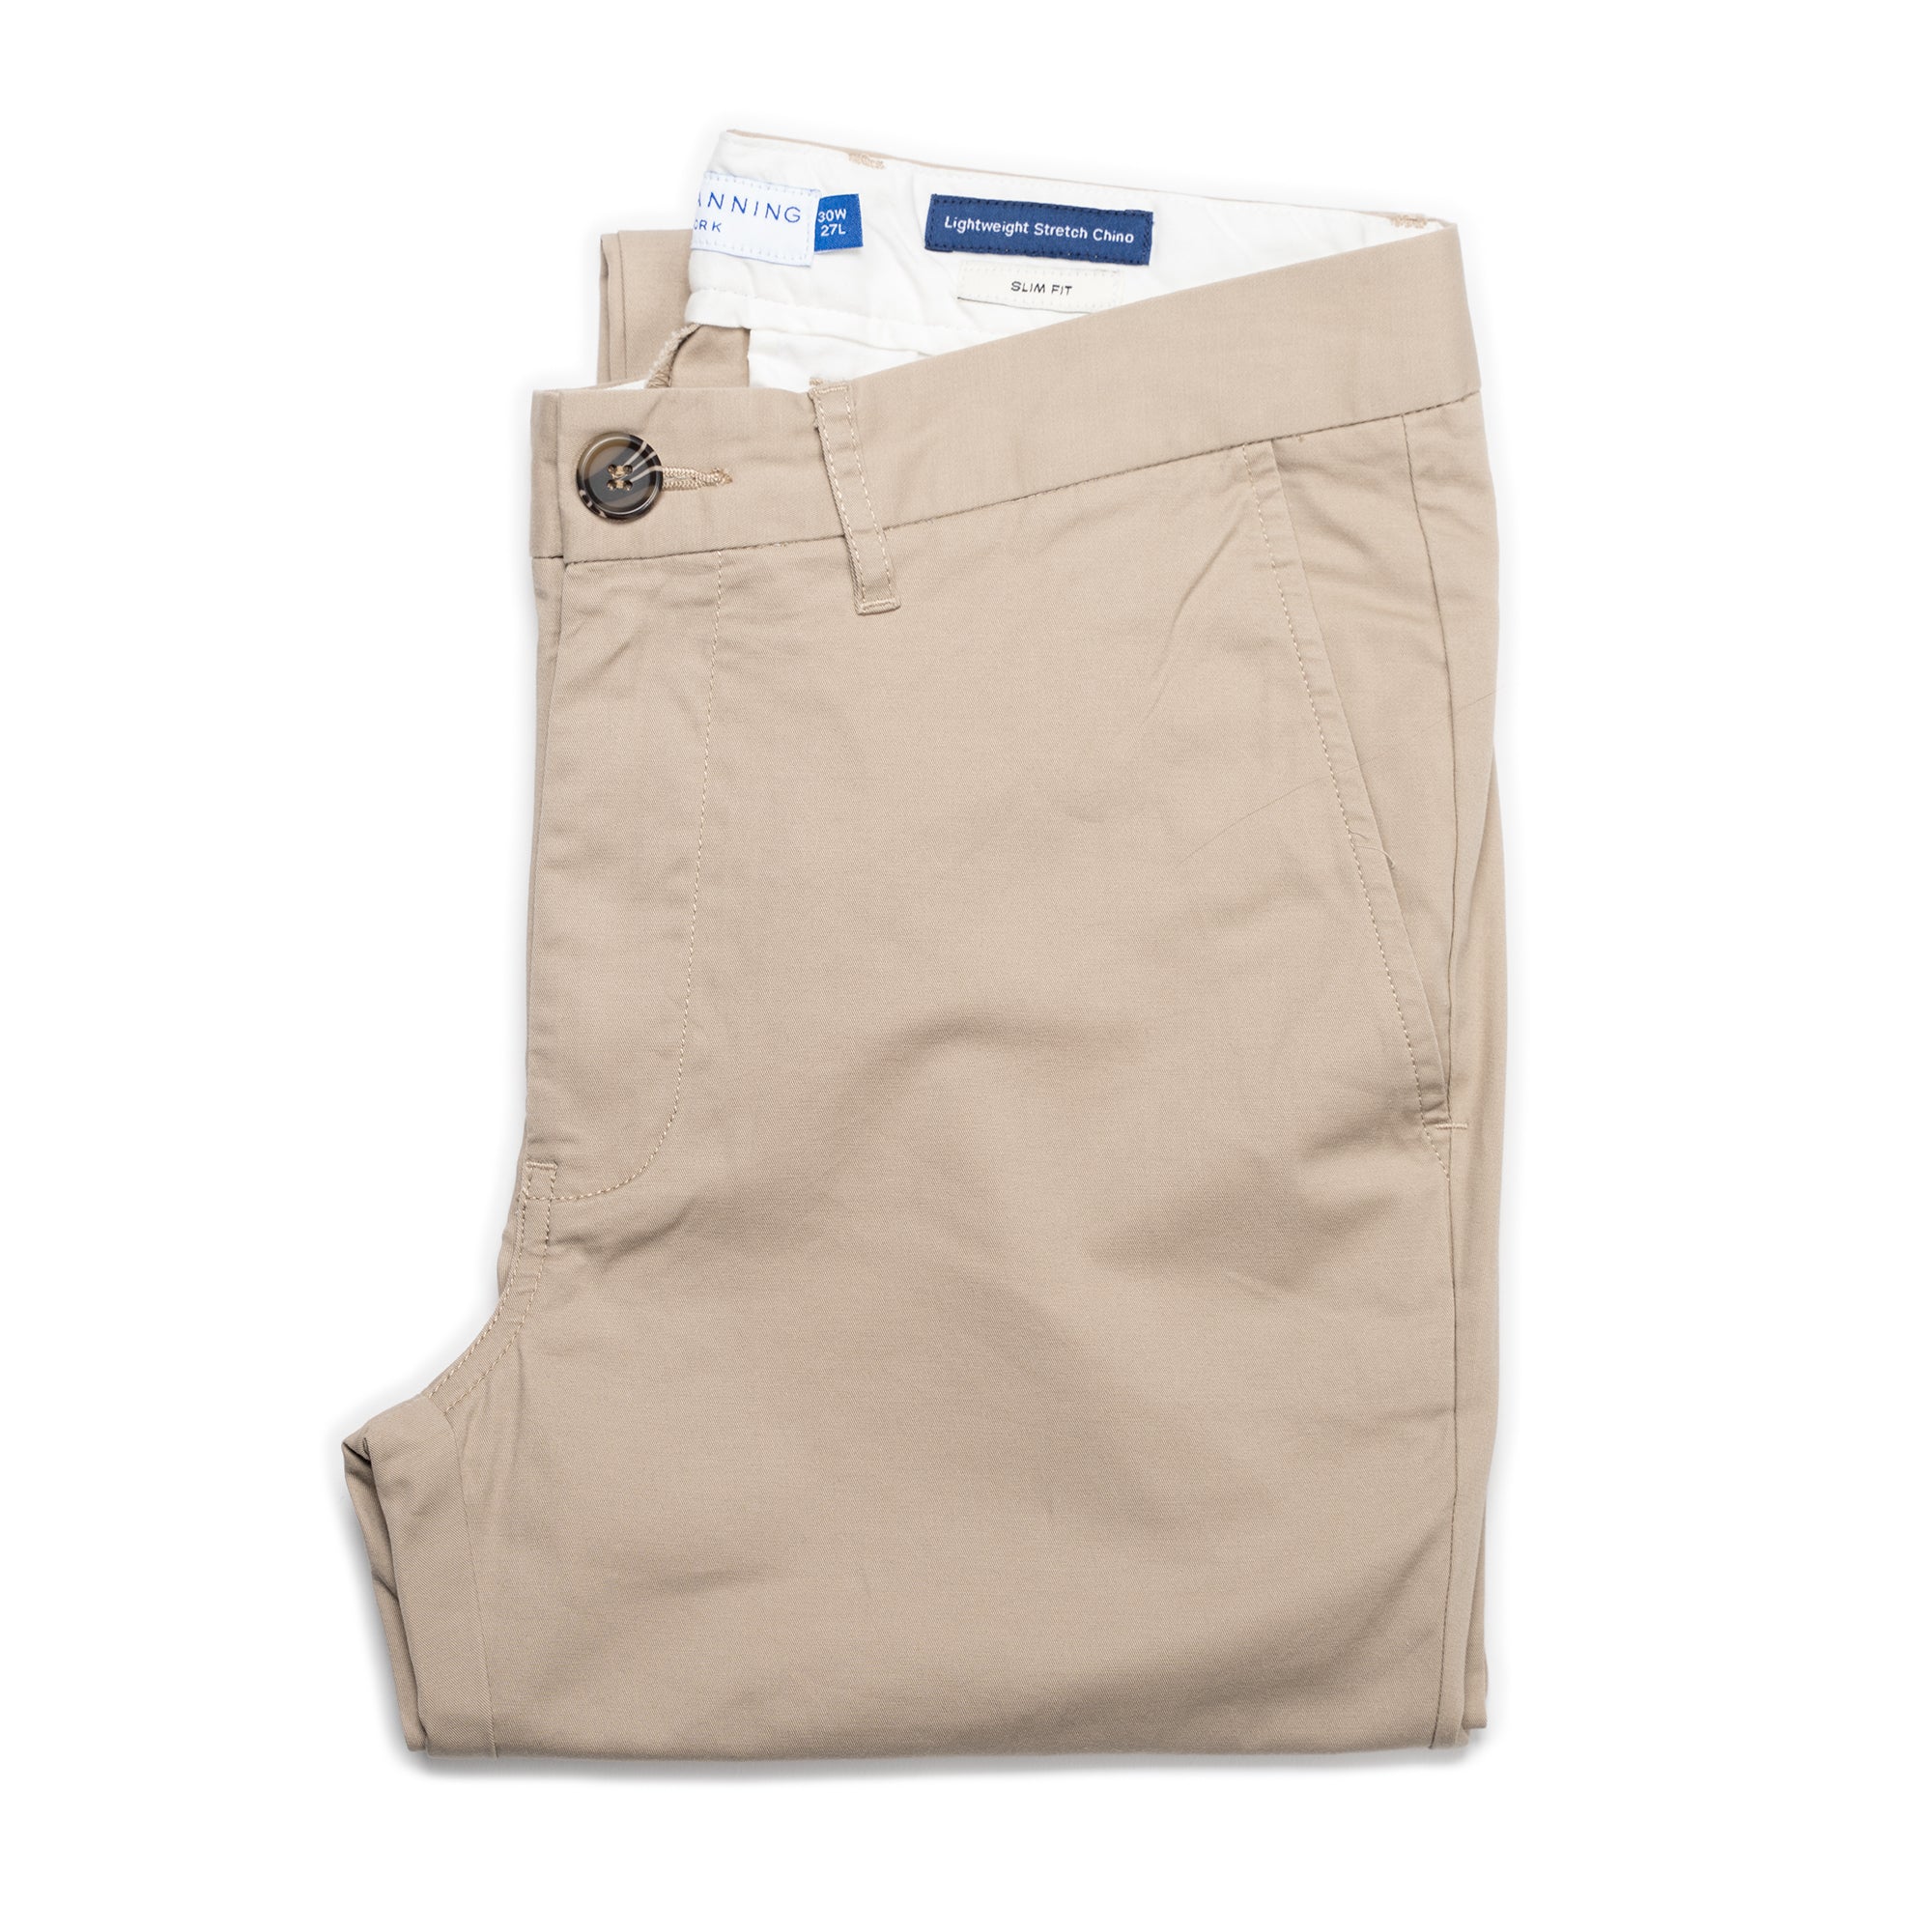 The Lightweight Relaxed Chino